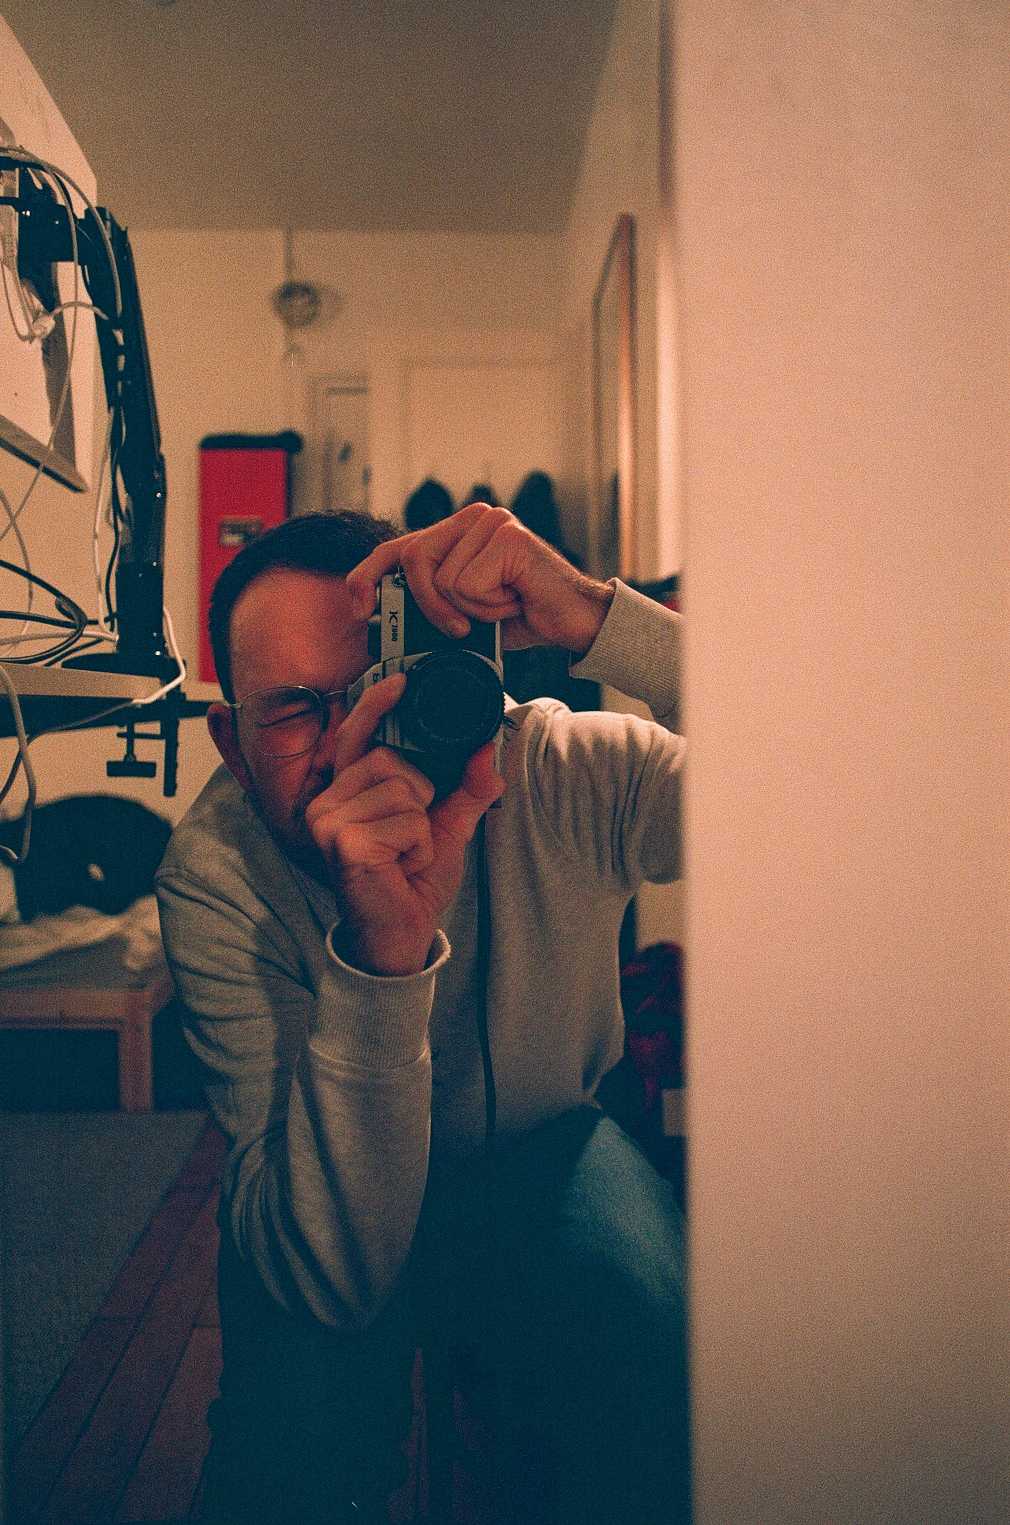 A guy sitting, leaning forward, holding a camera reflected in a long narrow mirror